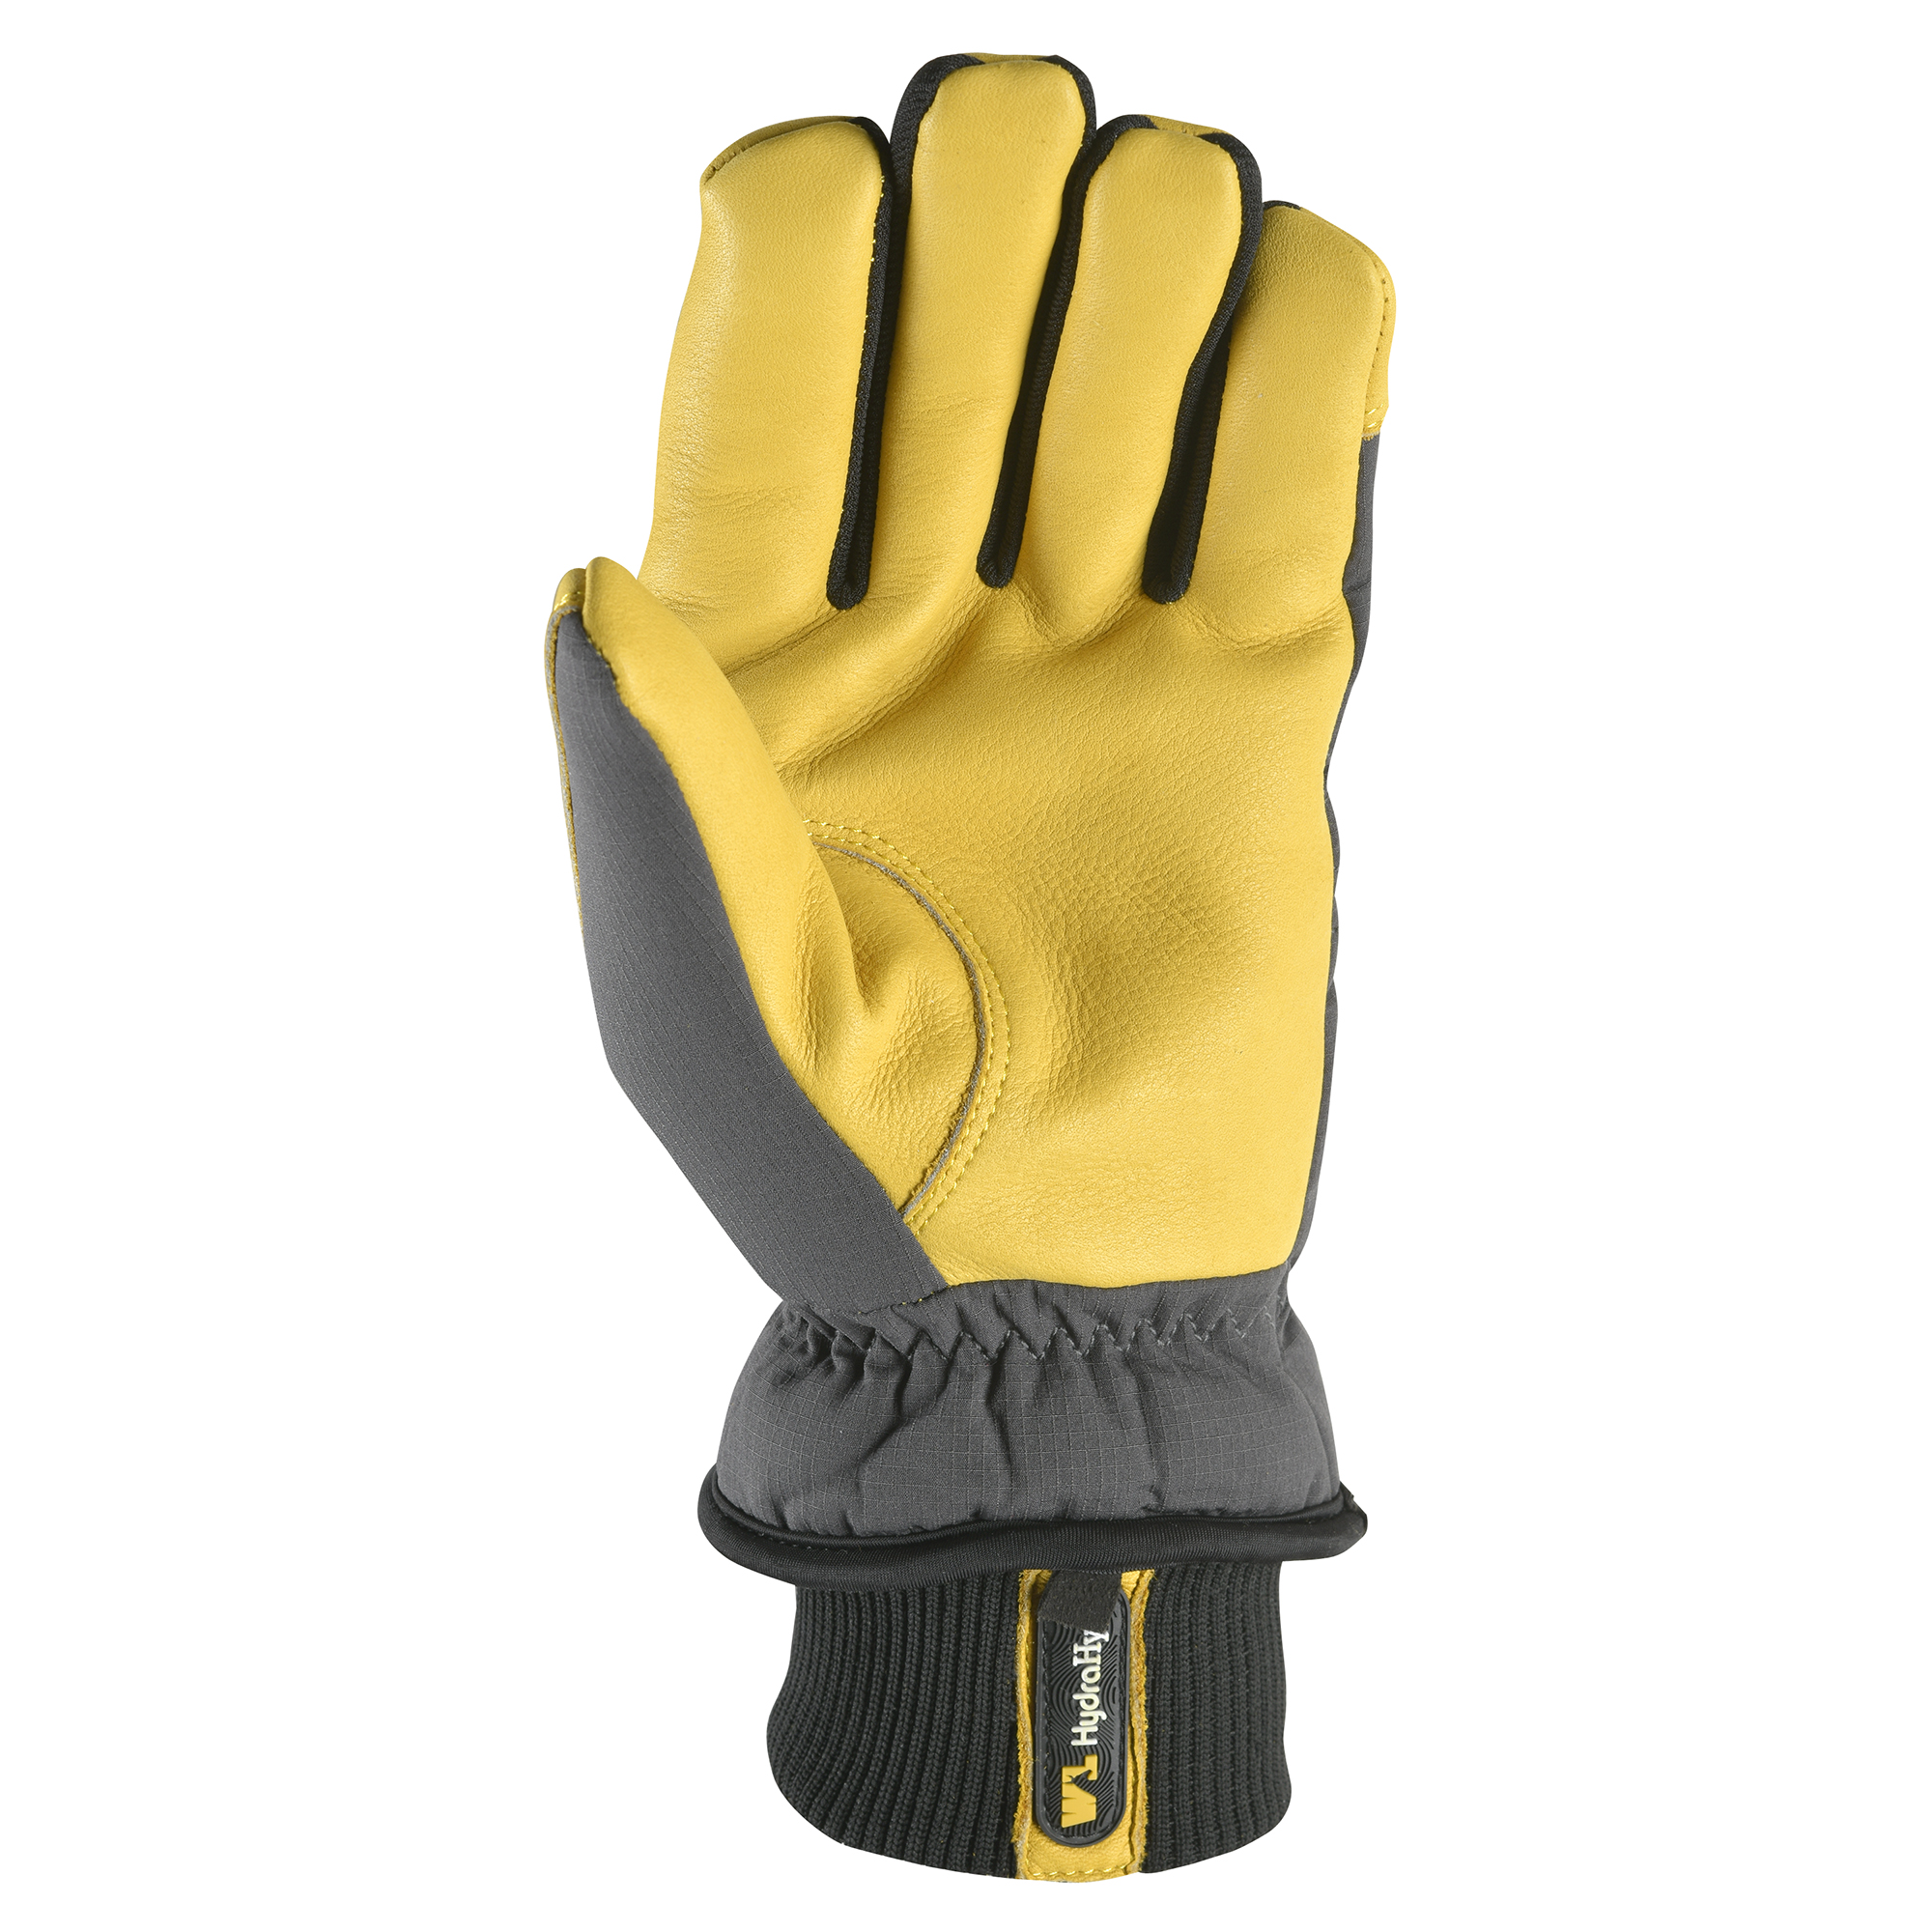 Wells Lamont | HydraHyde Insulated Grain Cowhide Leather Hybrid Glove, Gray